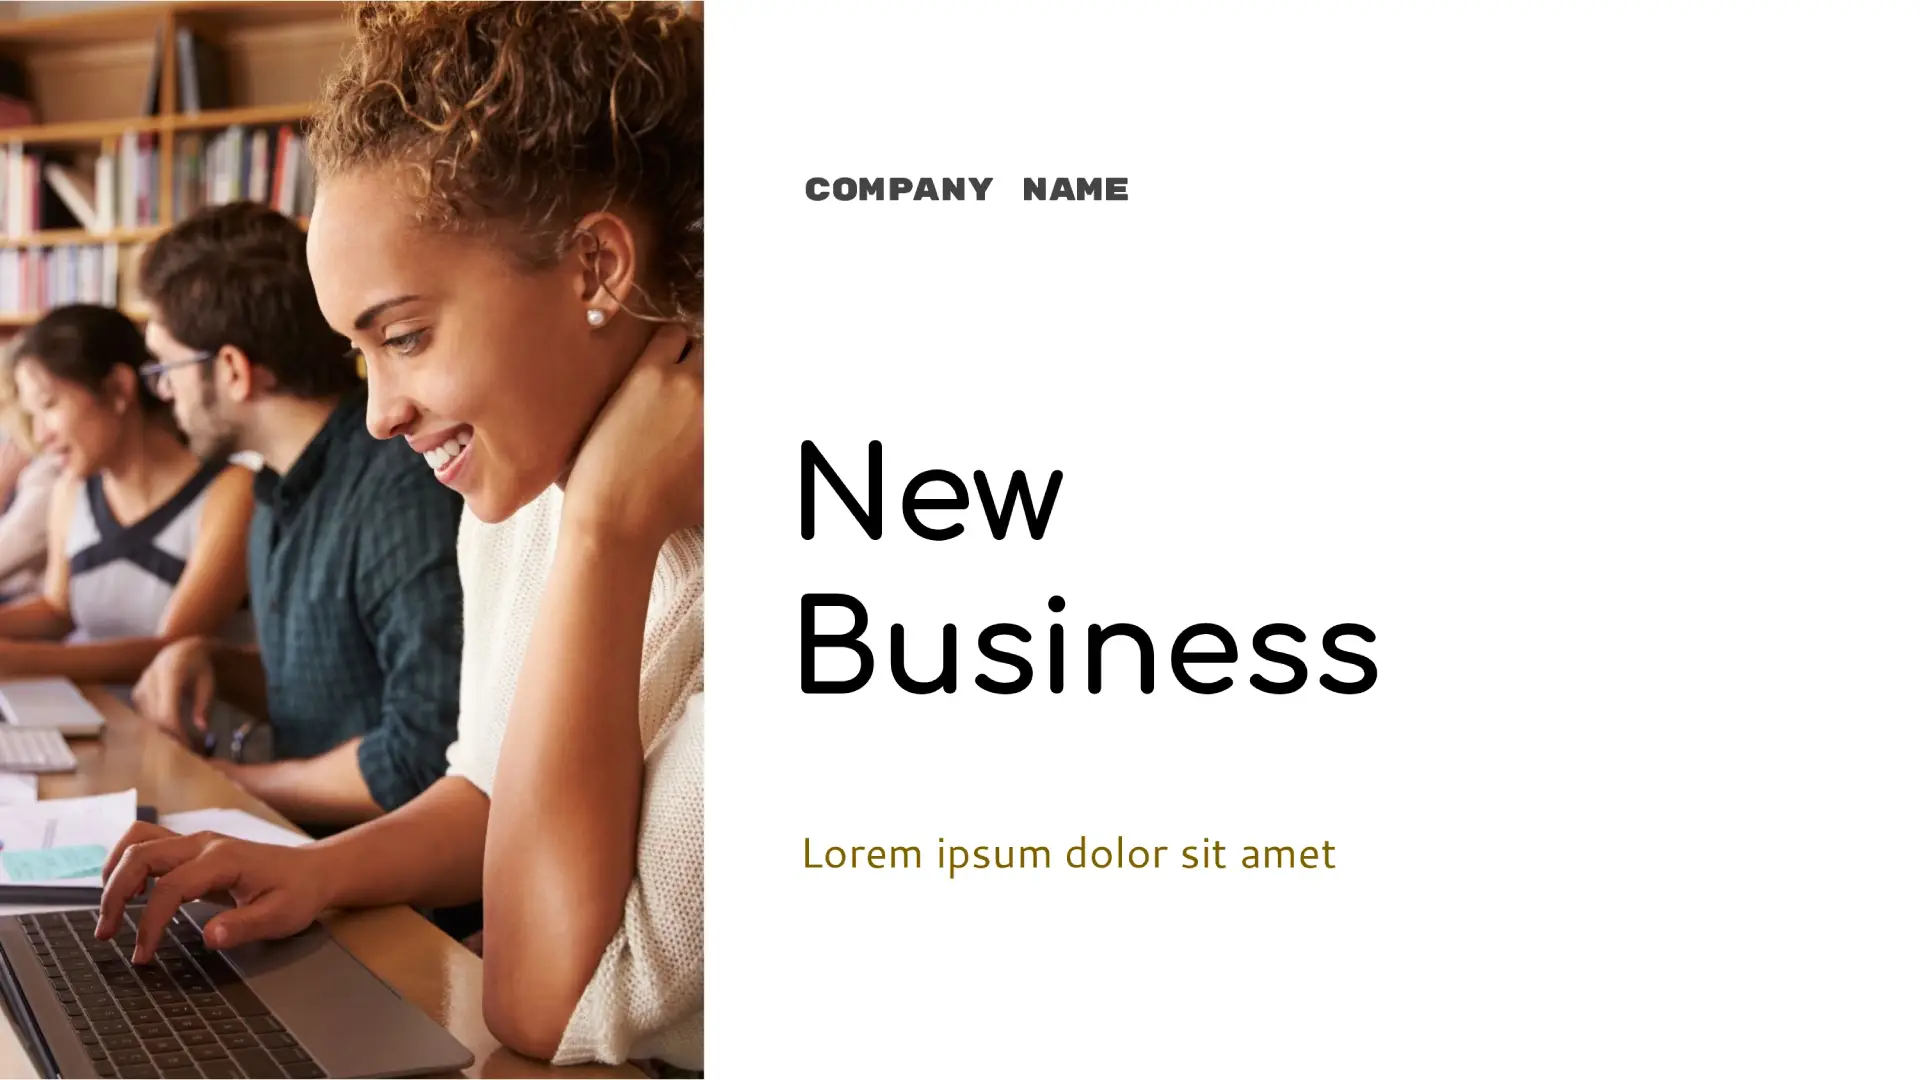 New Business Template for Google Slides